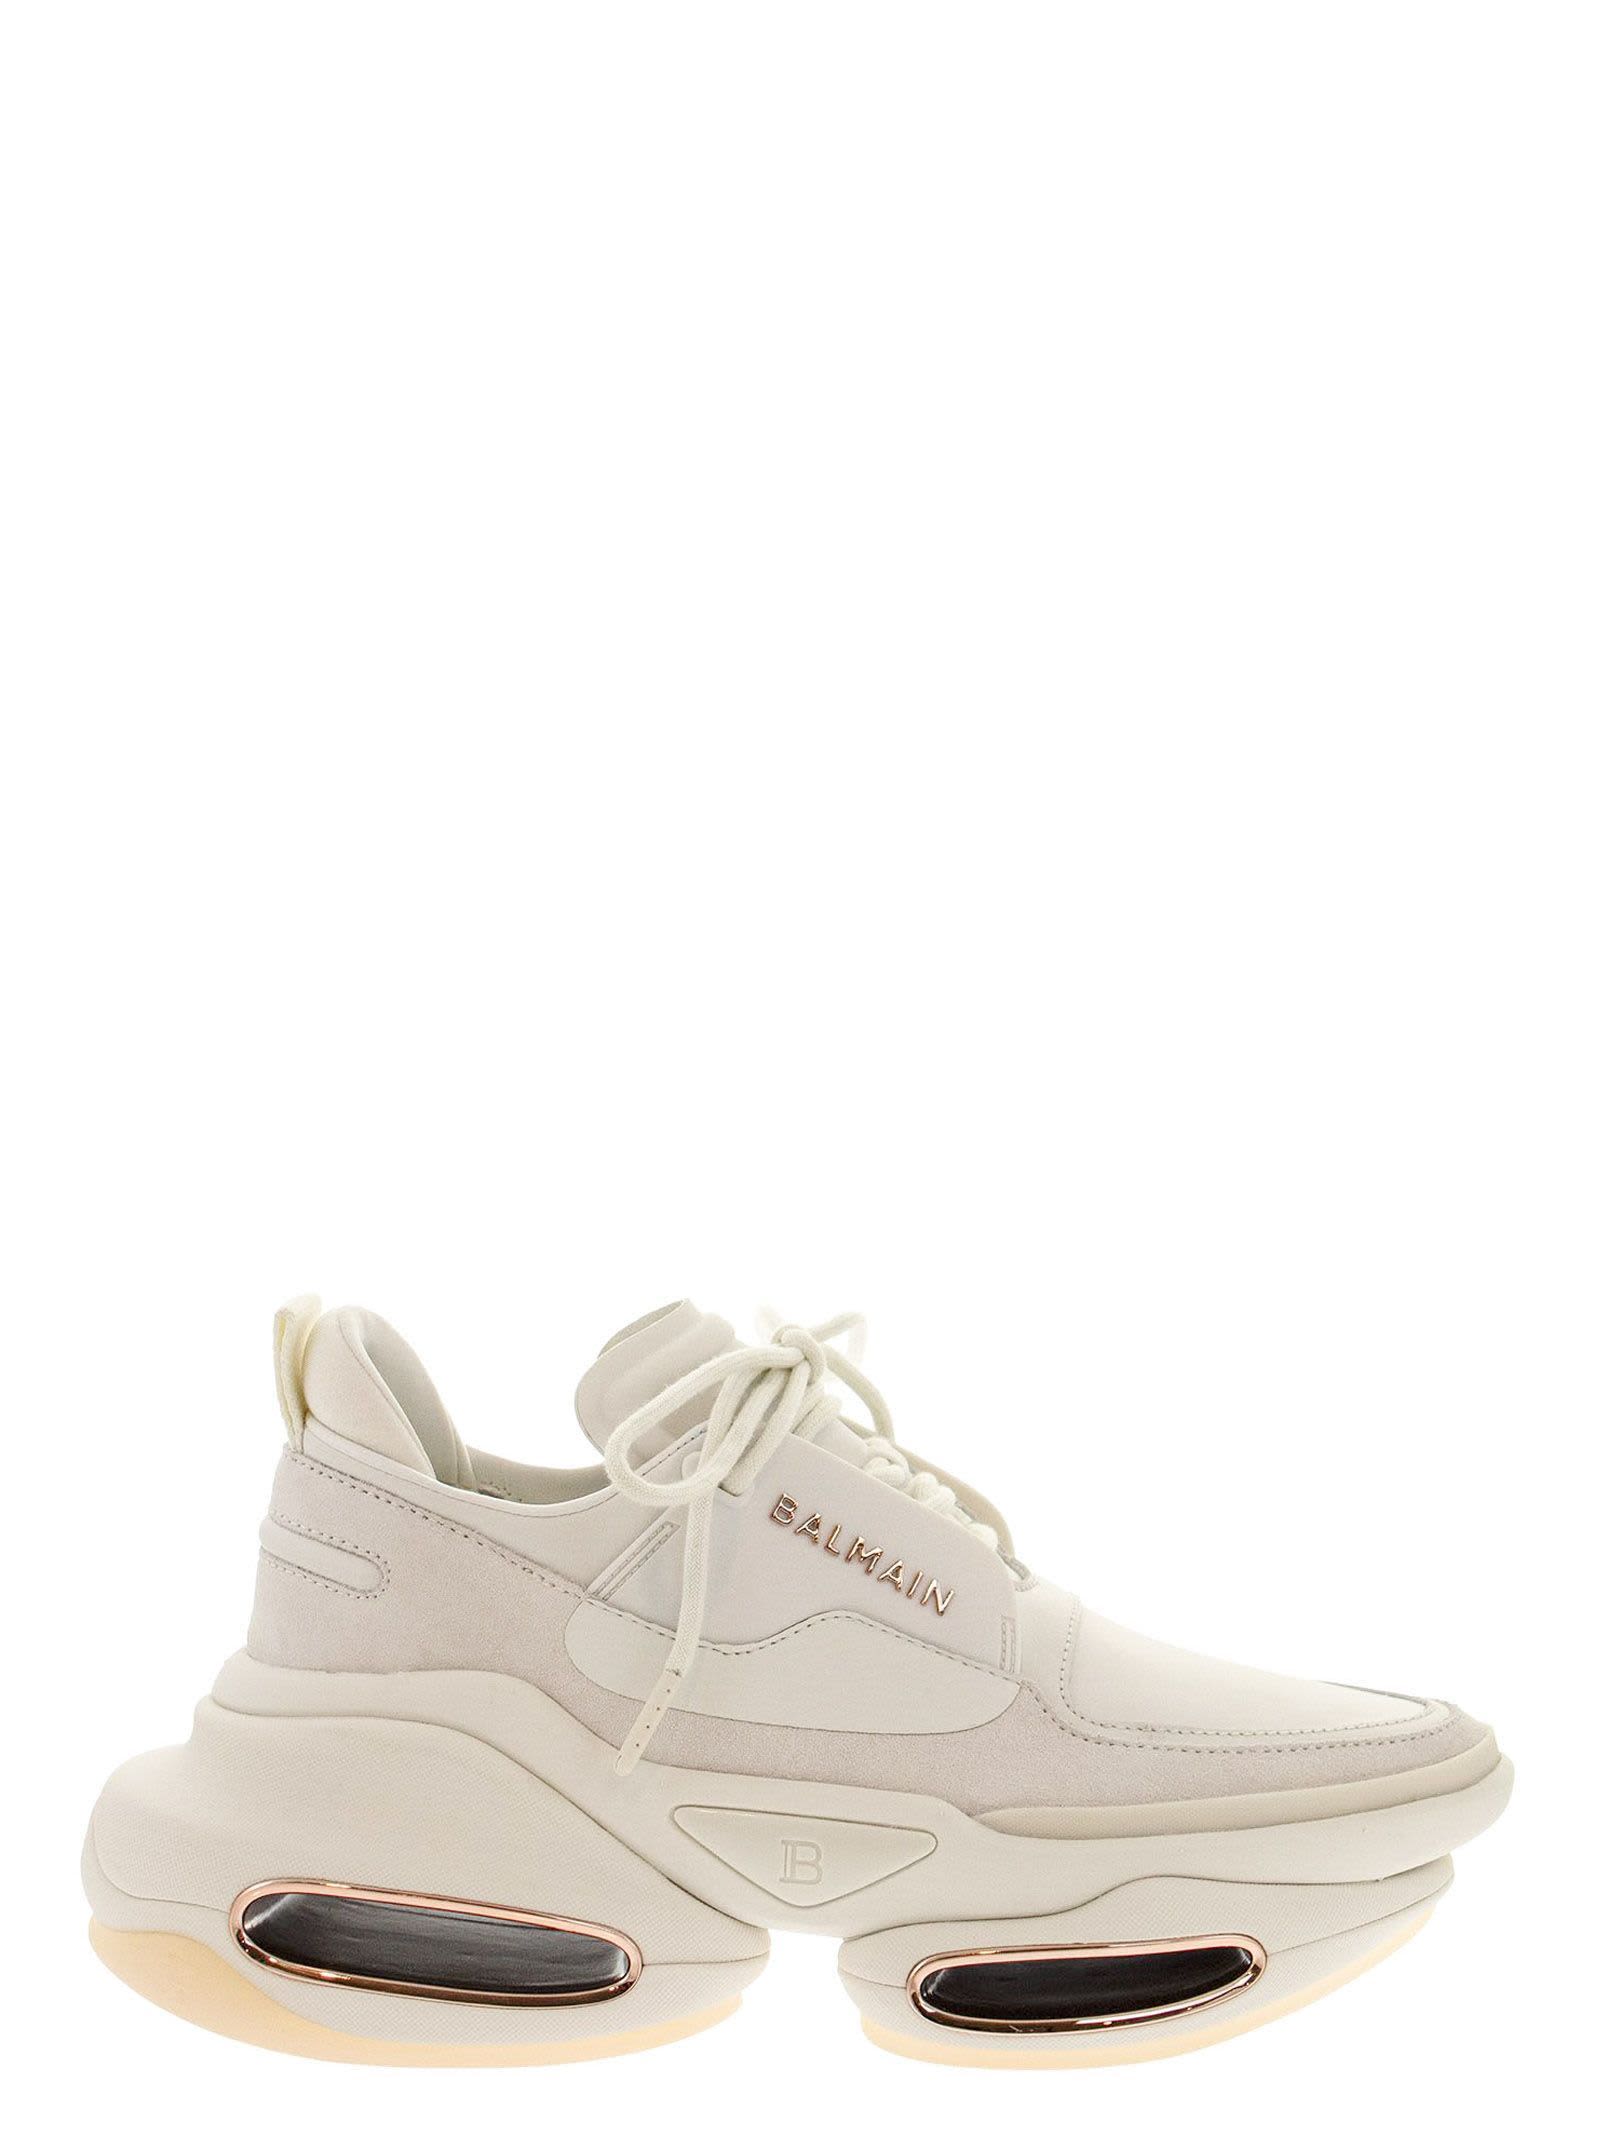 Balmain White Leather And Suede B-bold Low-top Sneakers